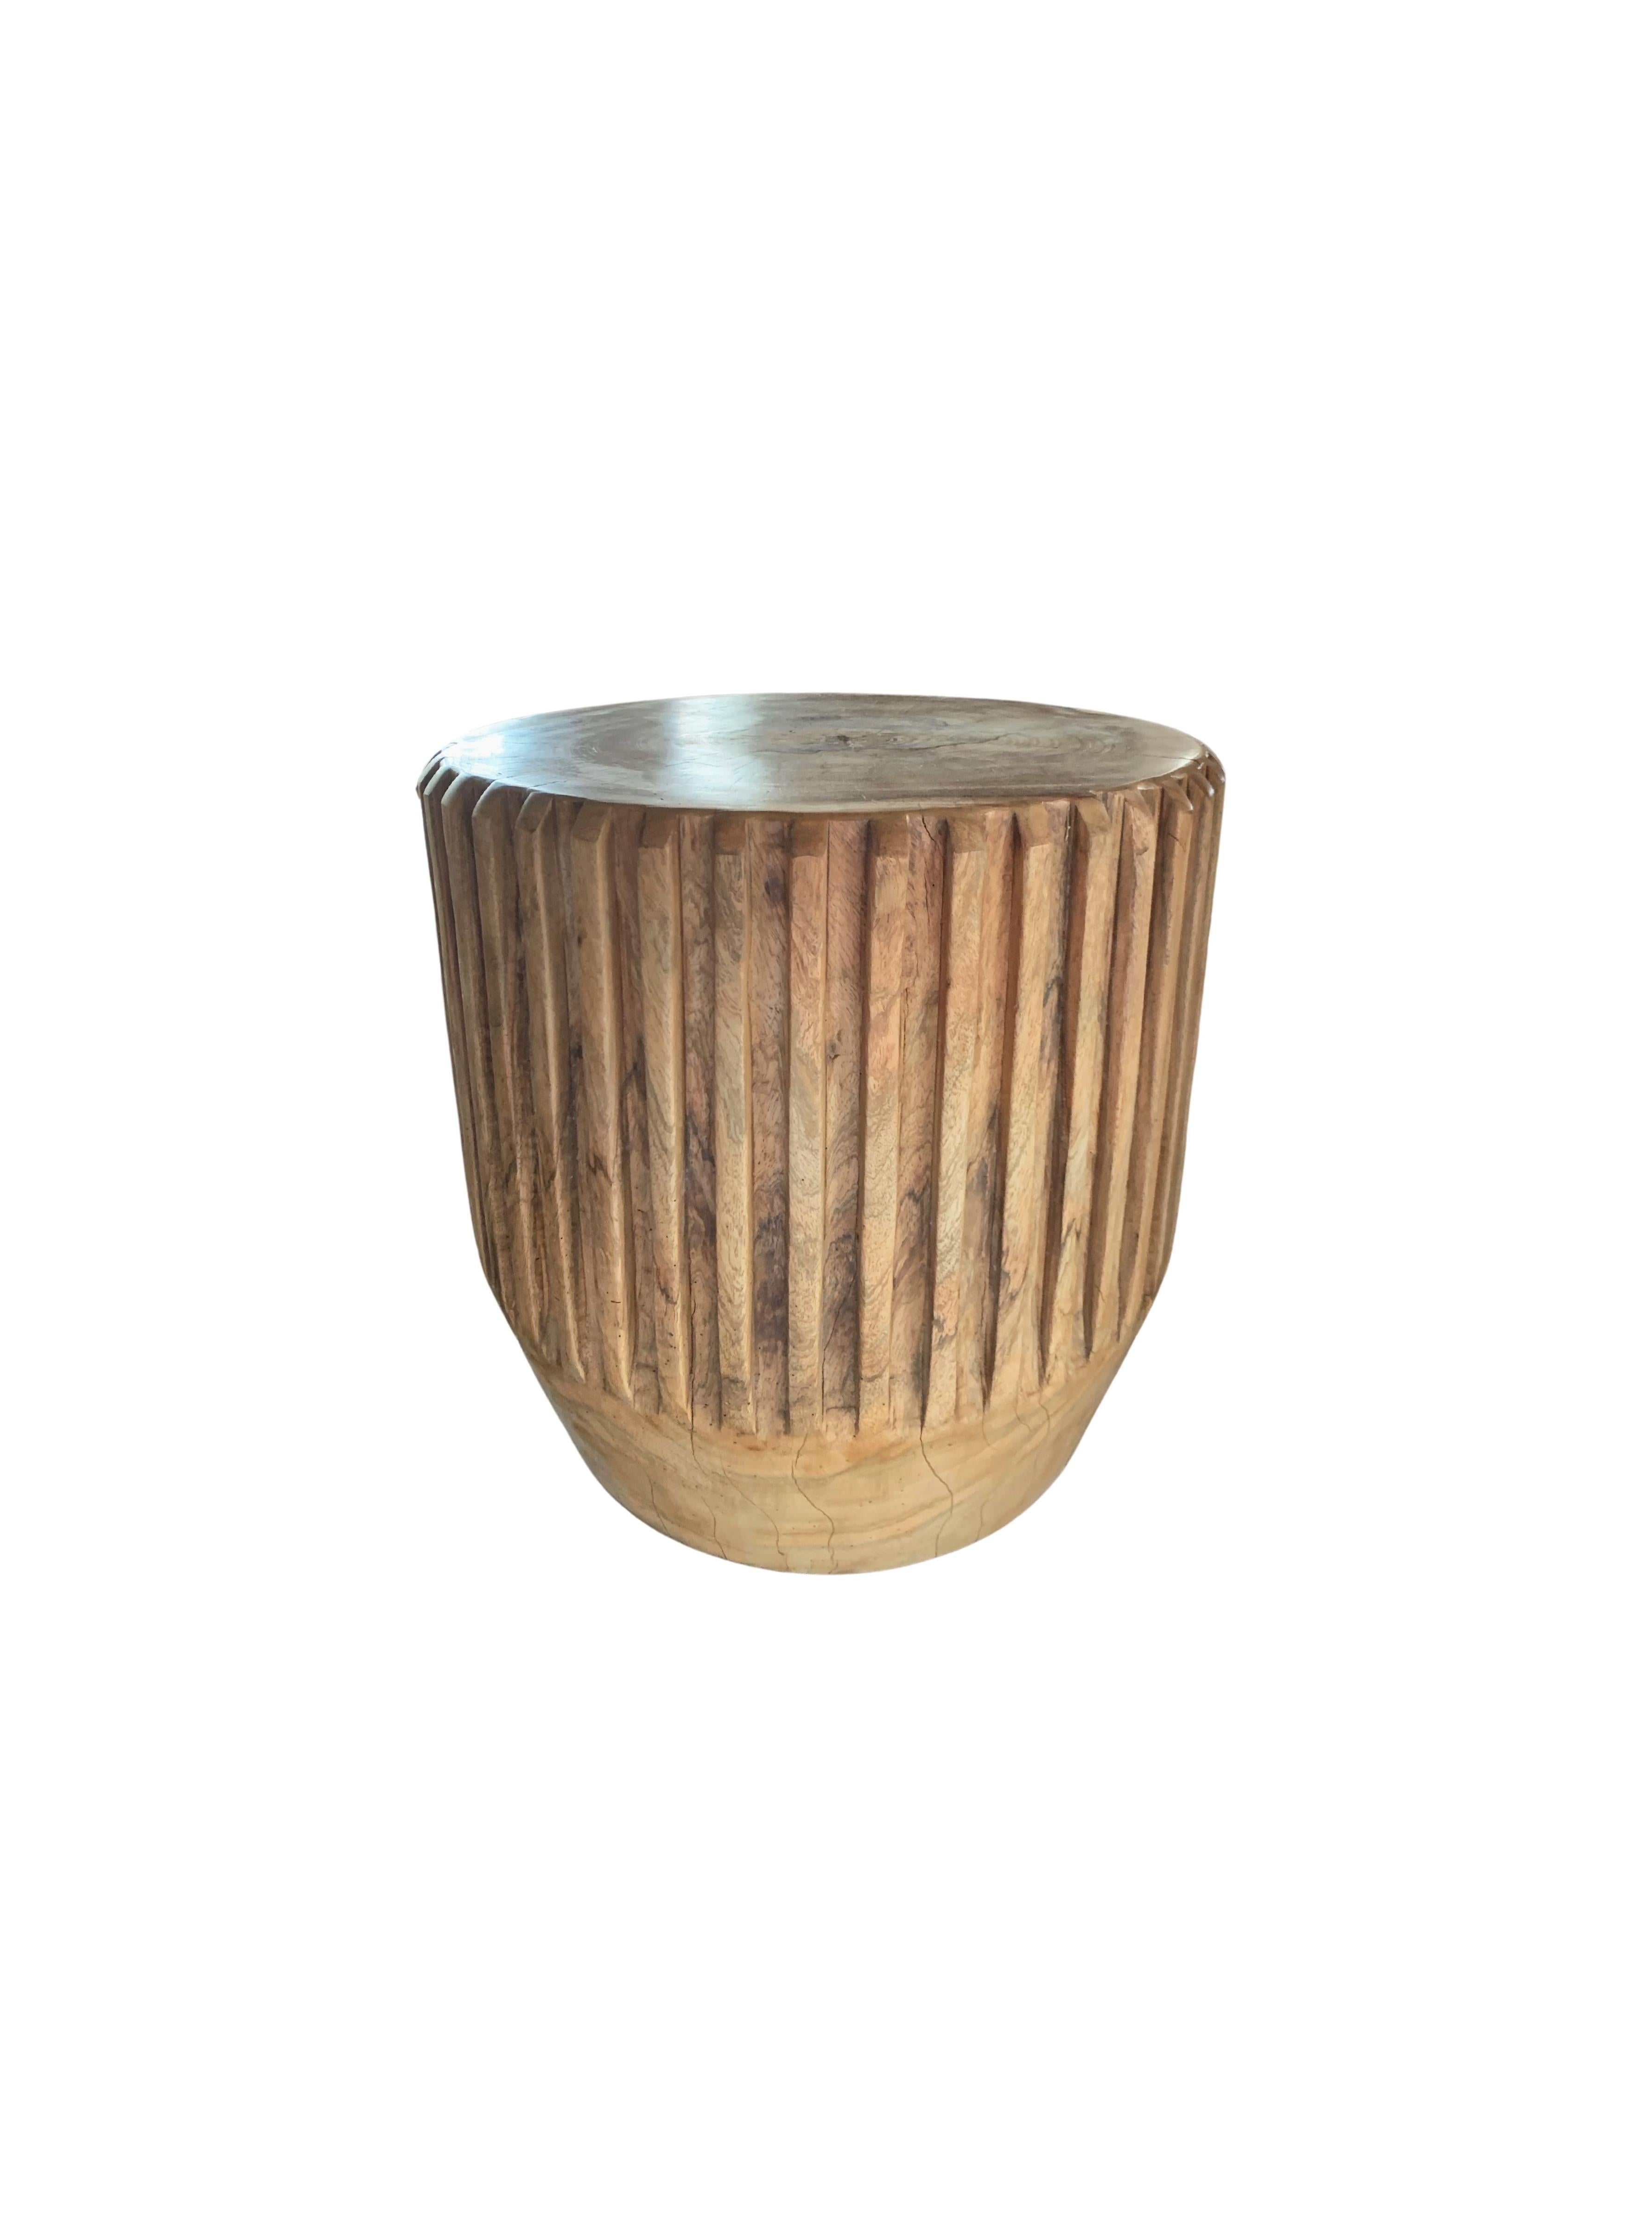 A wonderfully sculptural round side table with an engraved ribbed design on its sides. Its neutral pigments make it perfect for any space. A uniquely sculptural and versatile piece certain to invoke conversation. It was crafted from a solid block of